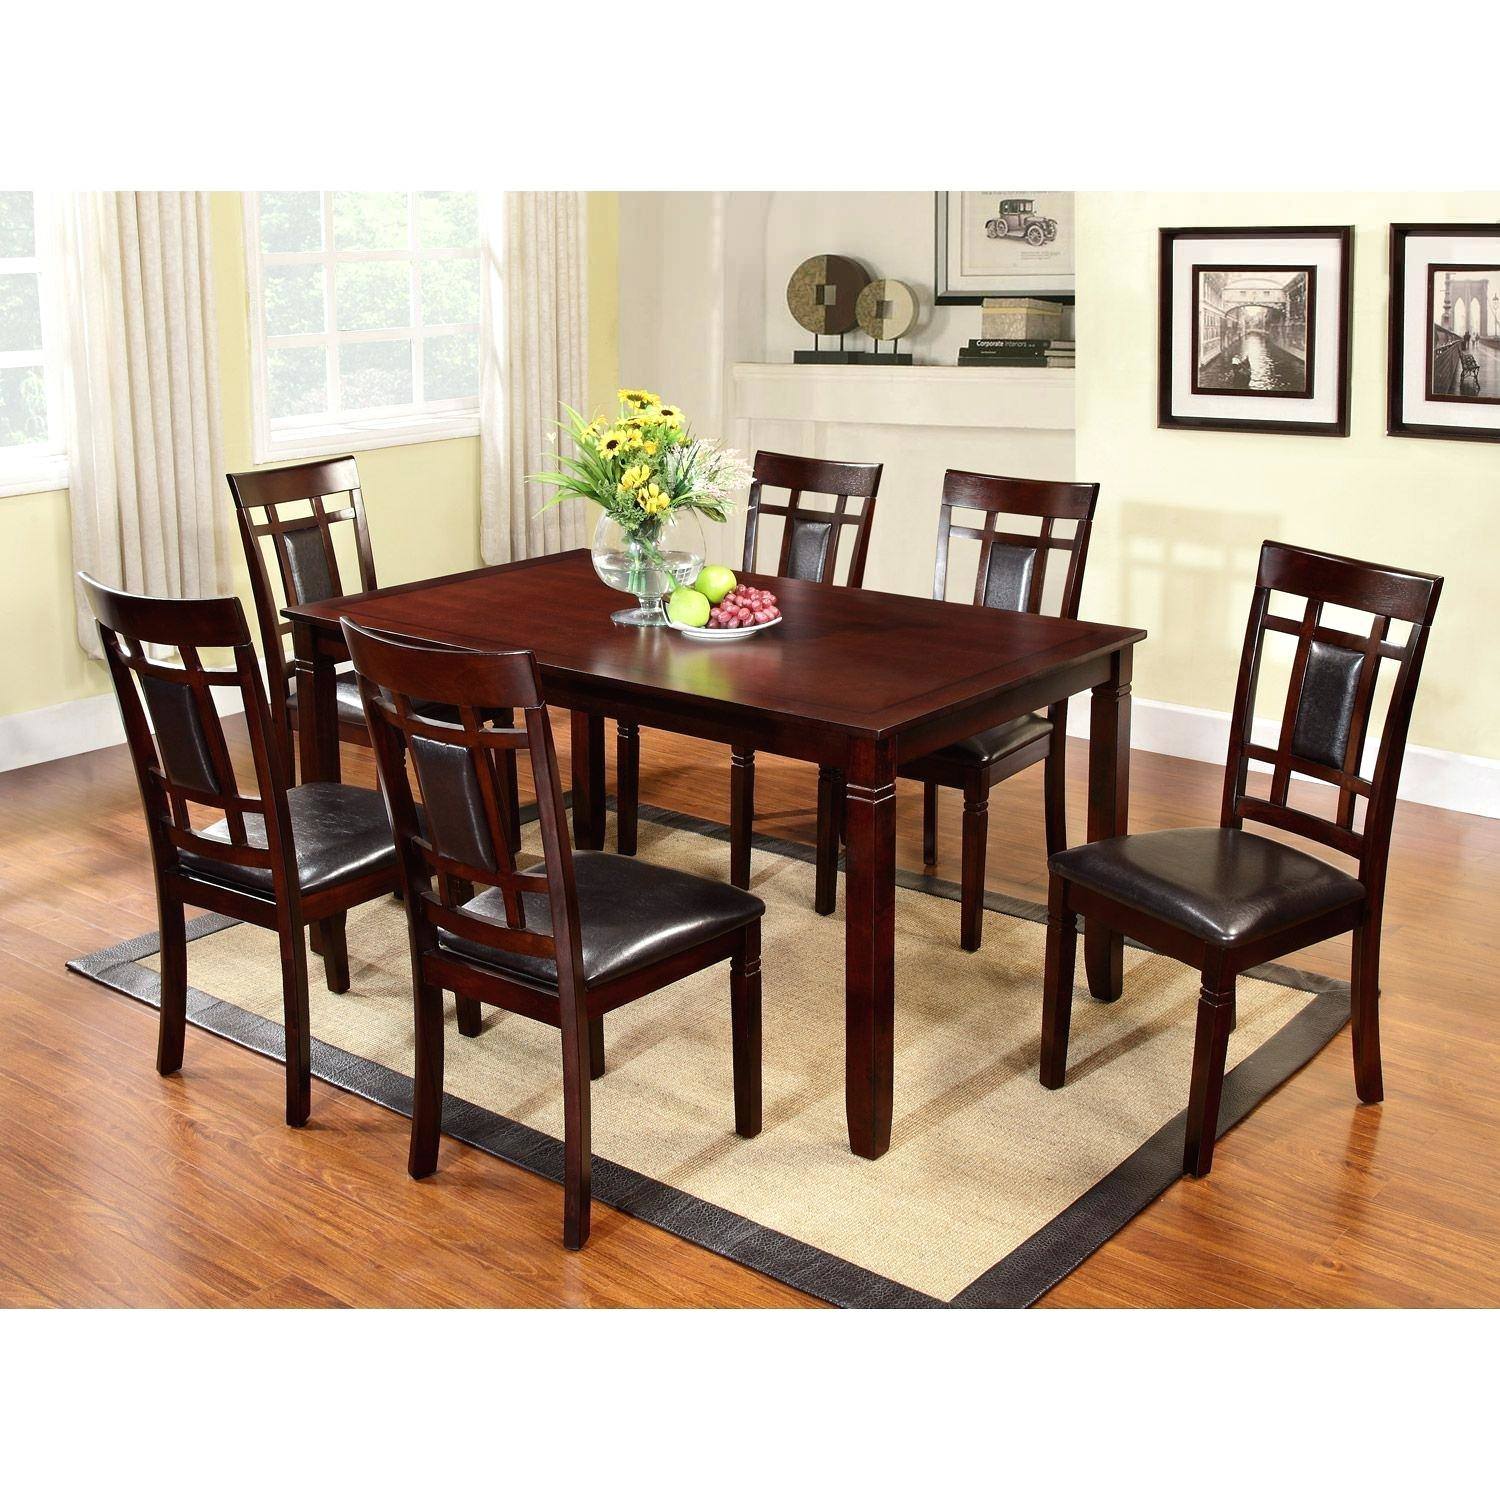 monarch specialties dining table and chairs shiitake reviews crate barrel tables